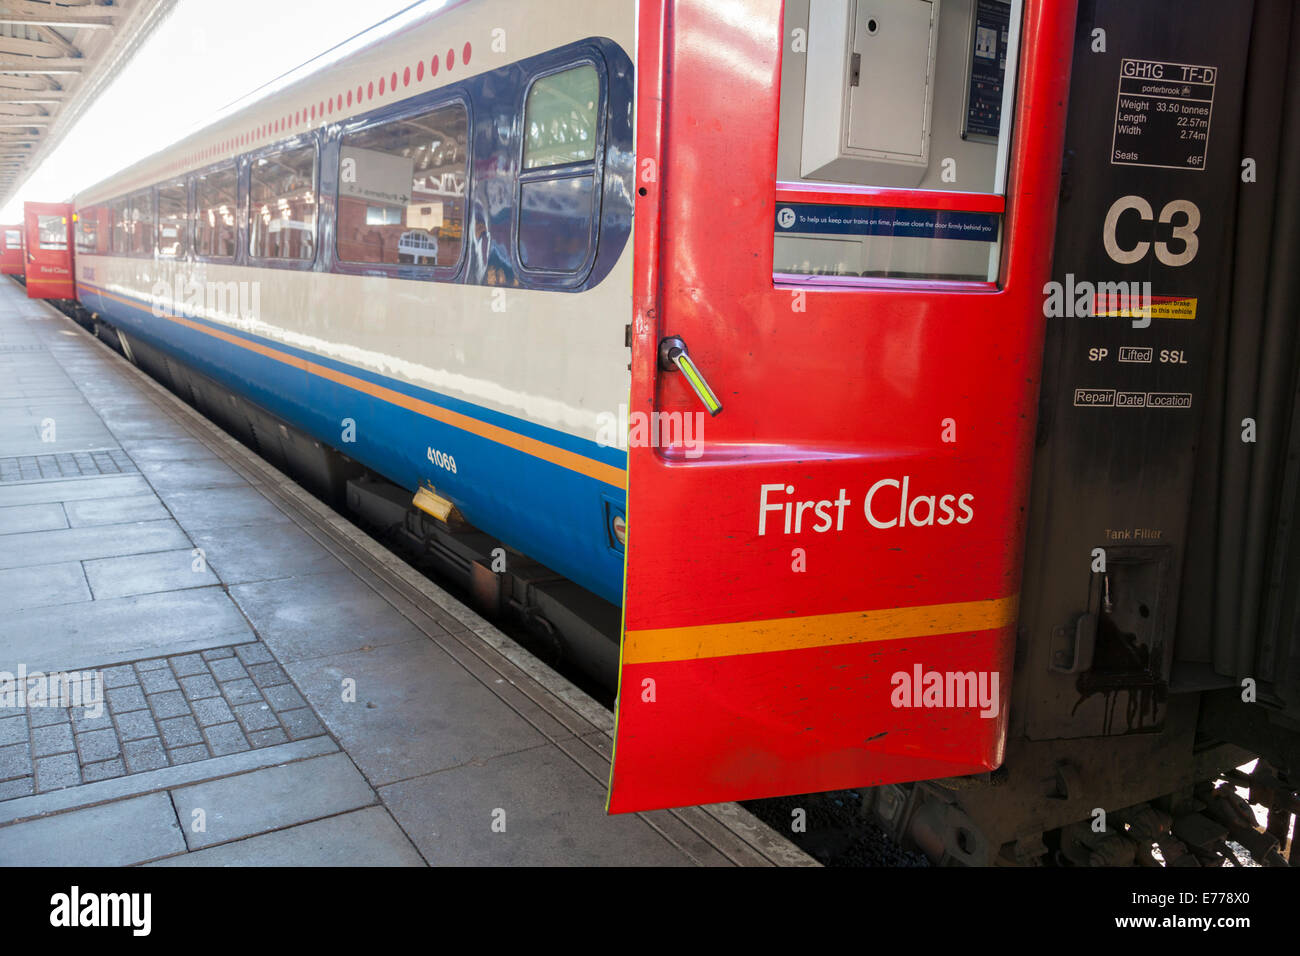 First Class train carriage on an East Midlands Trains high speed train (HST) at Nottingham Railway Station, Nottingham, England, UK Stock Photo